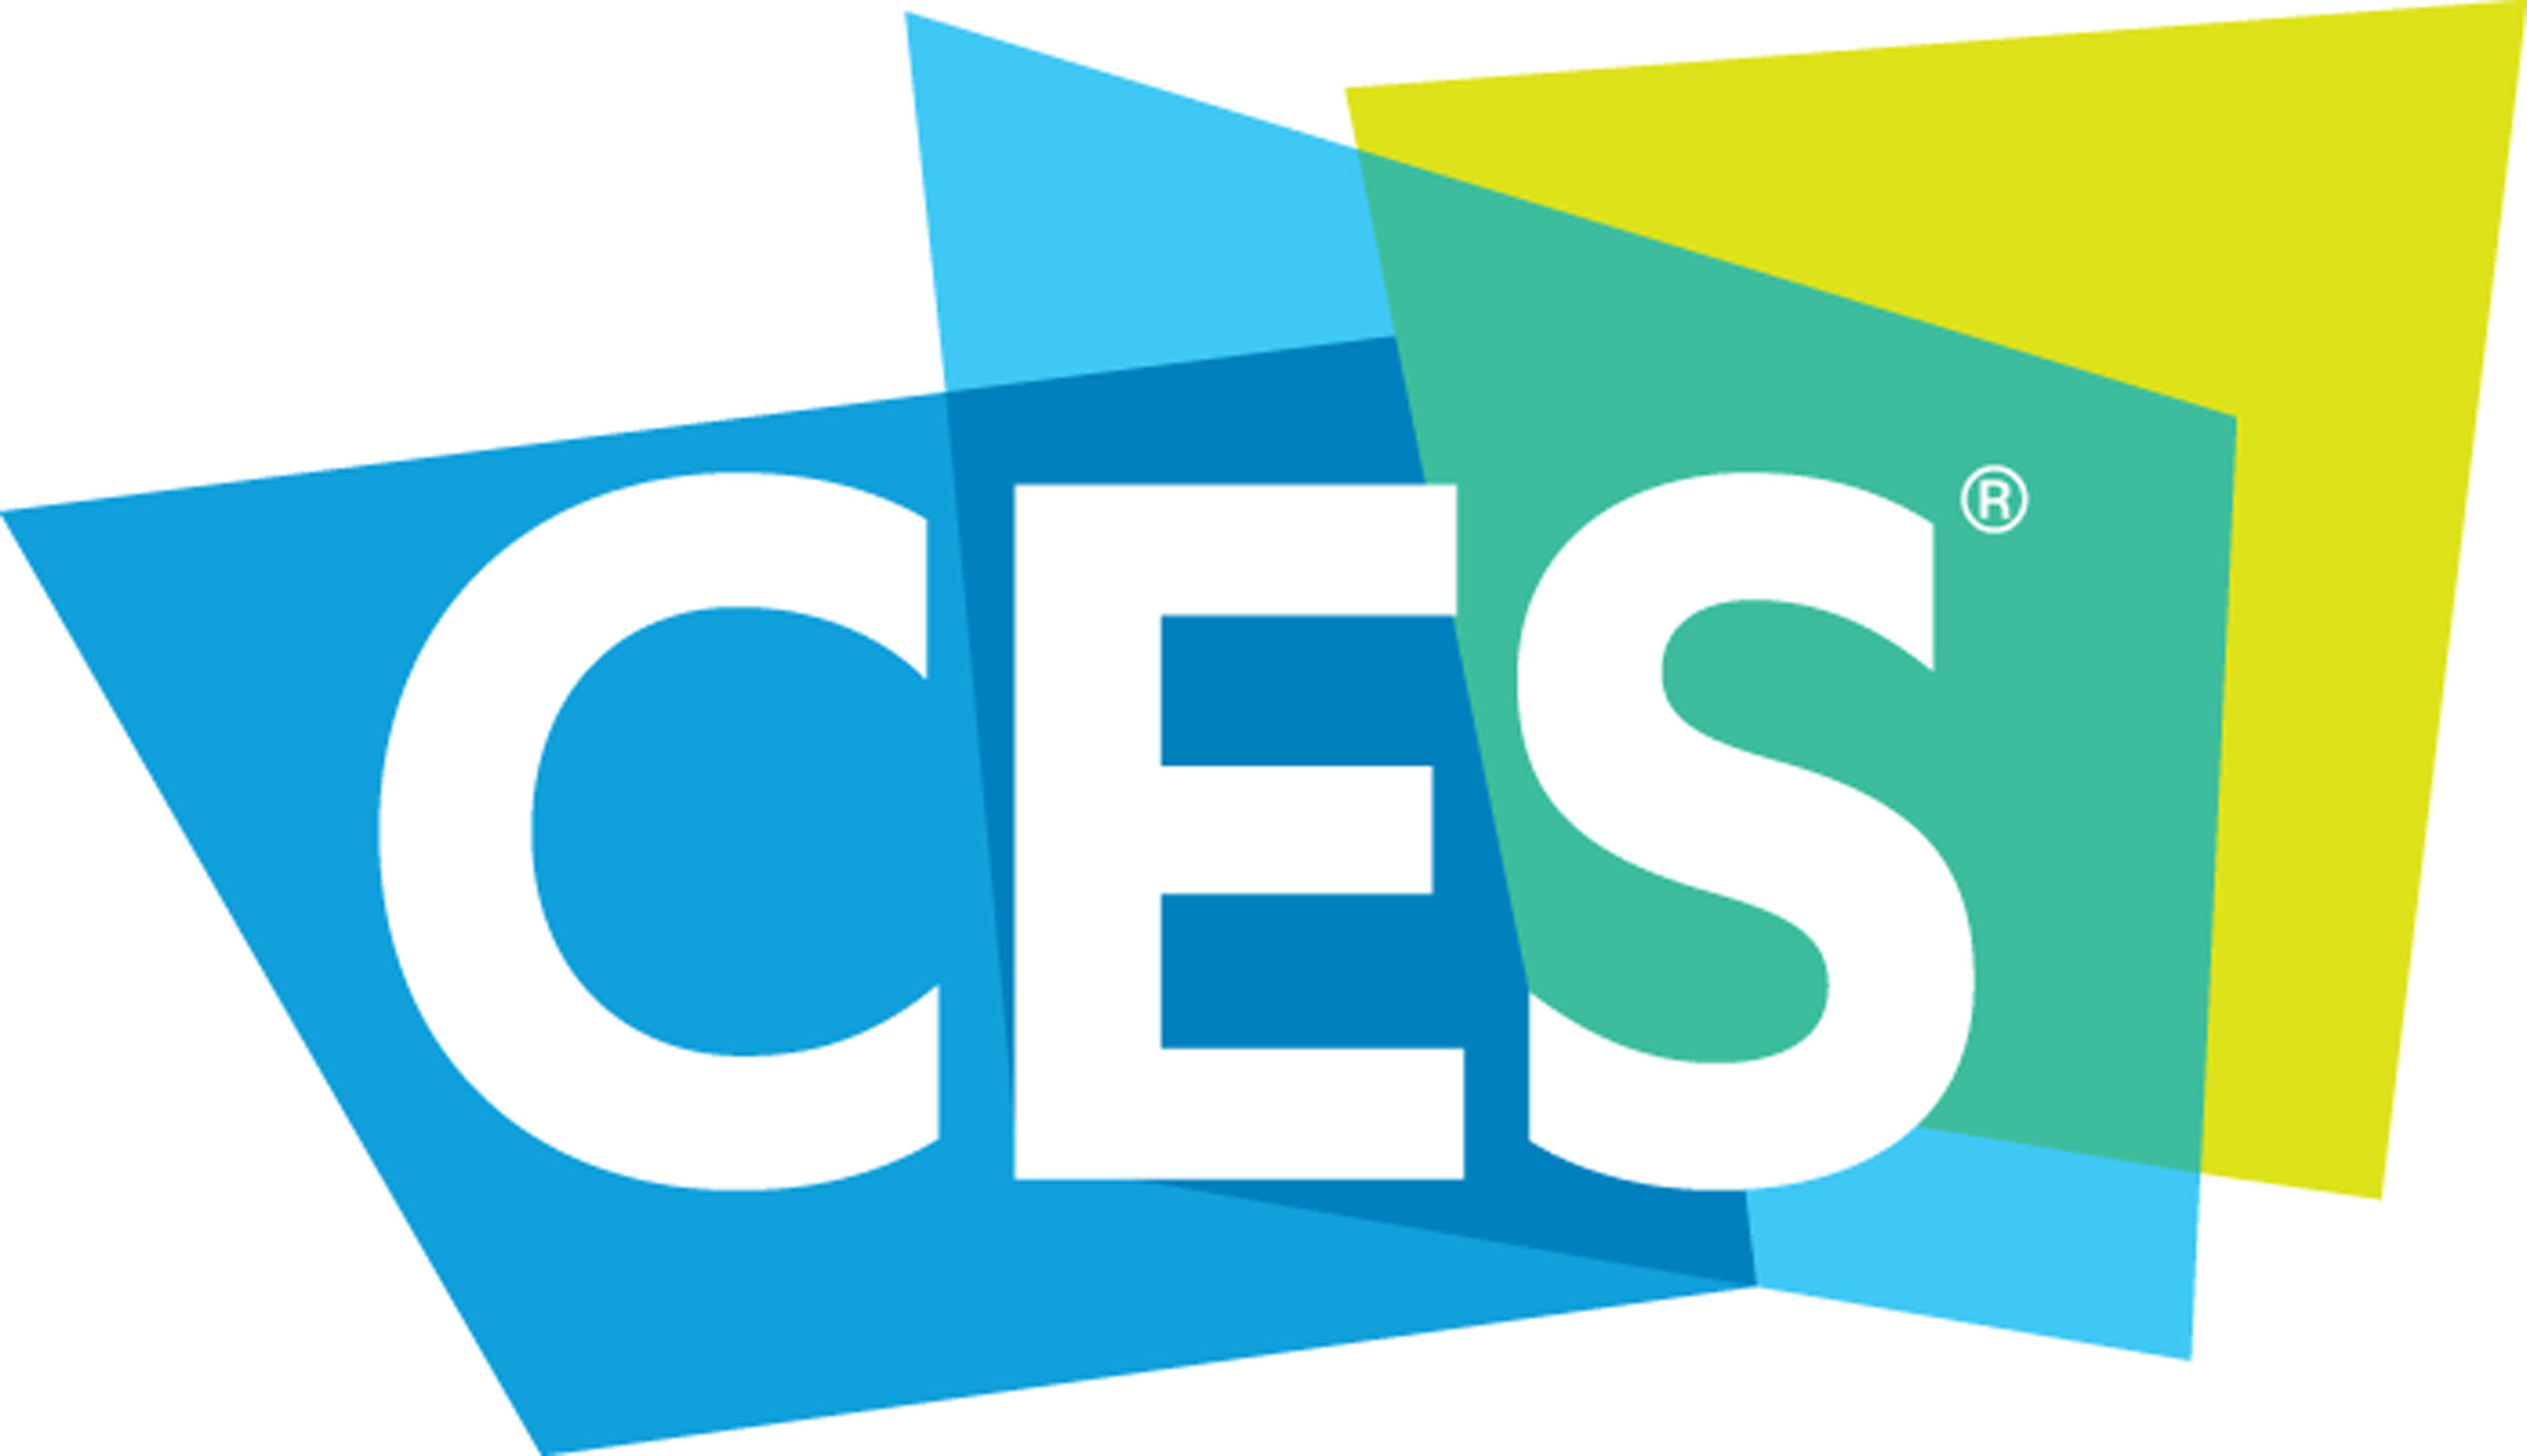 HUMAN TOUCH® RETURNS TO CES, DEFINING THE MASSAGE EXPERIENCE WITH THE RELEASE OF THE SUPER NOVO X, A STATE-OF-THE-ART THERAPEUTIC MASSAGE CHAIR IN A CLASS OF ITS OWN